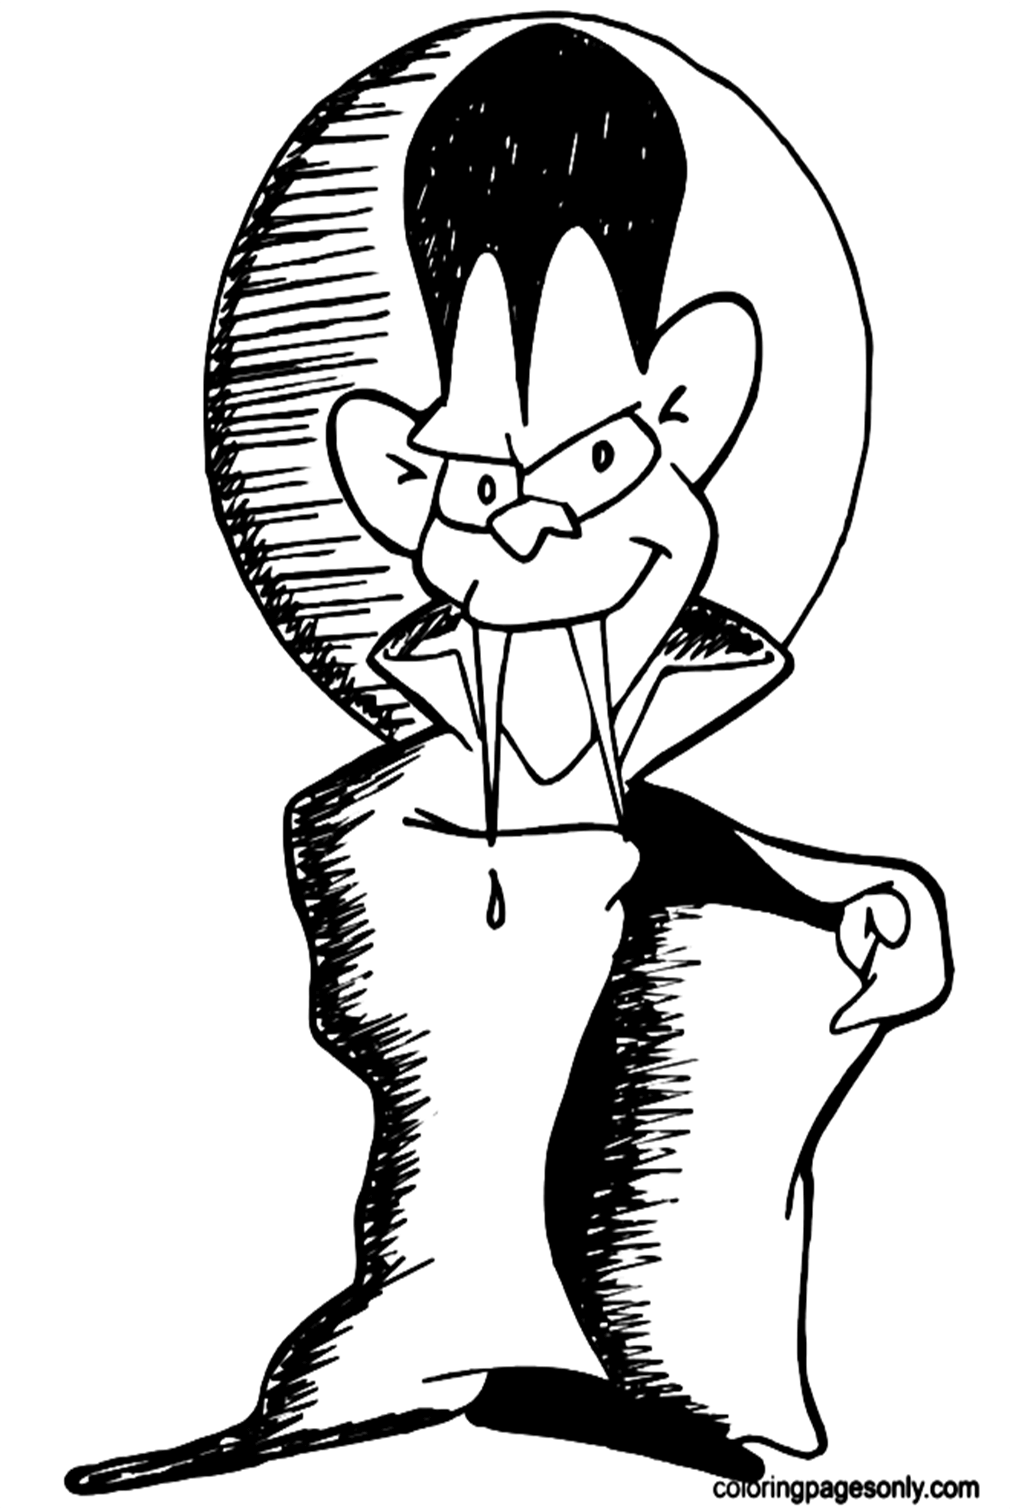 Vampire With Two Long Pointed Teeth Coloring Pages